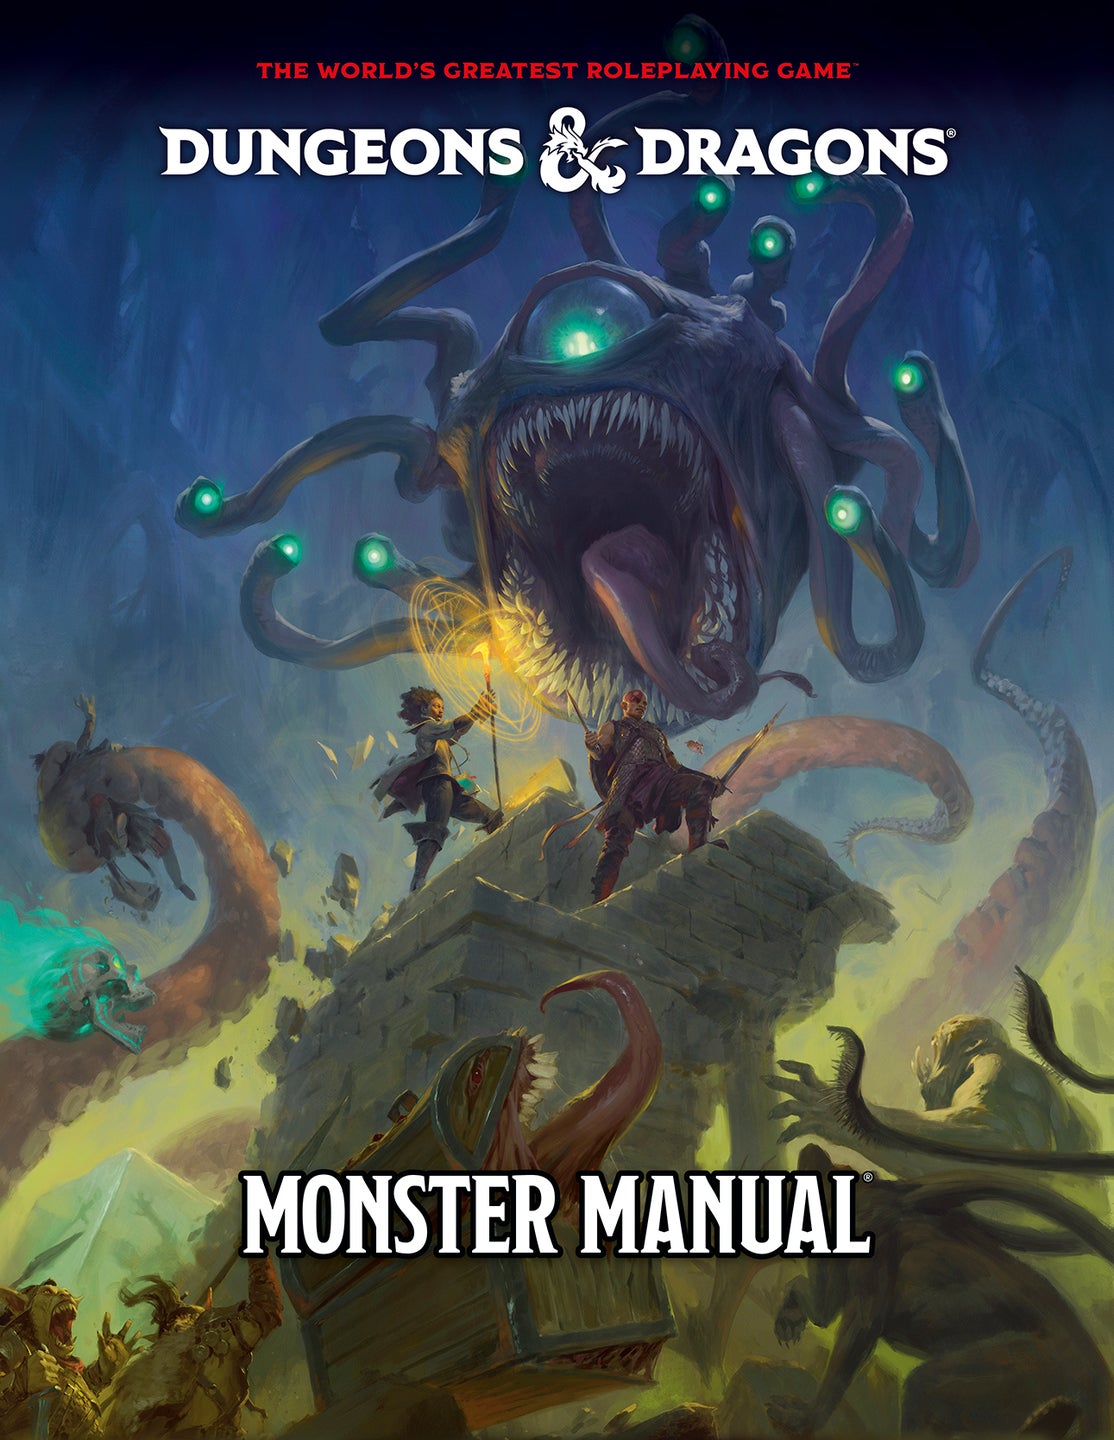 The new front cover for the Monster Manual